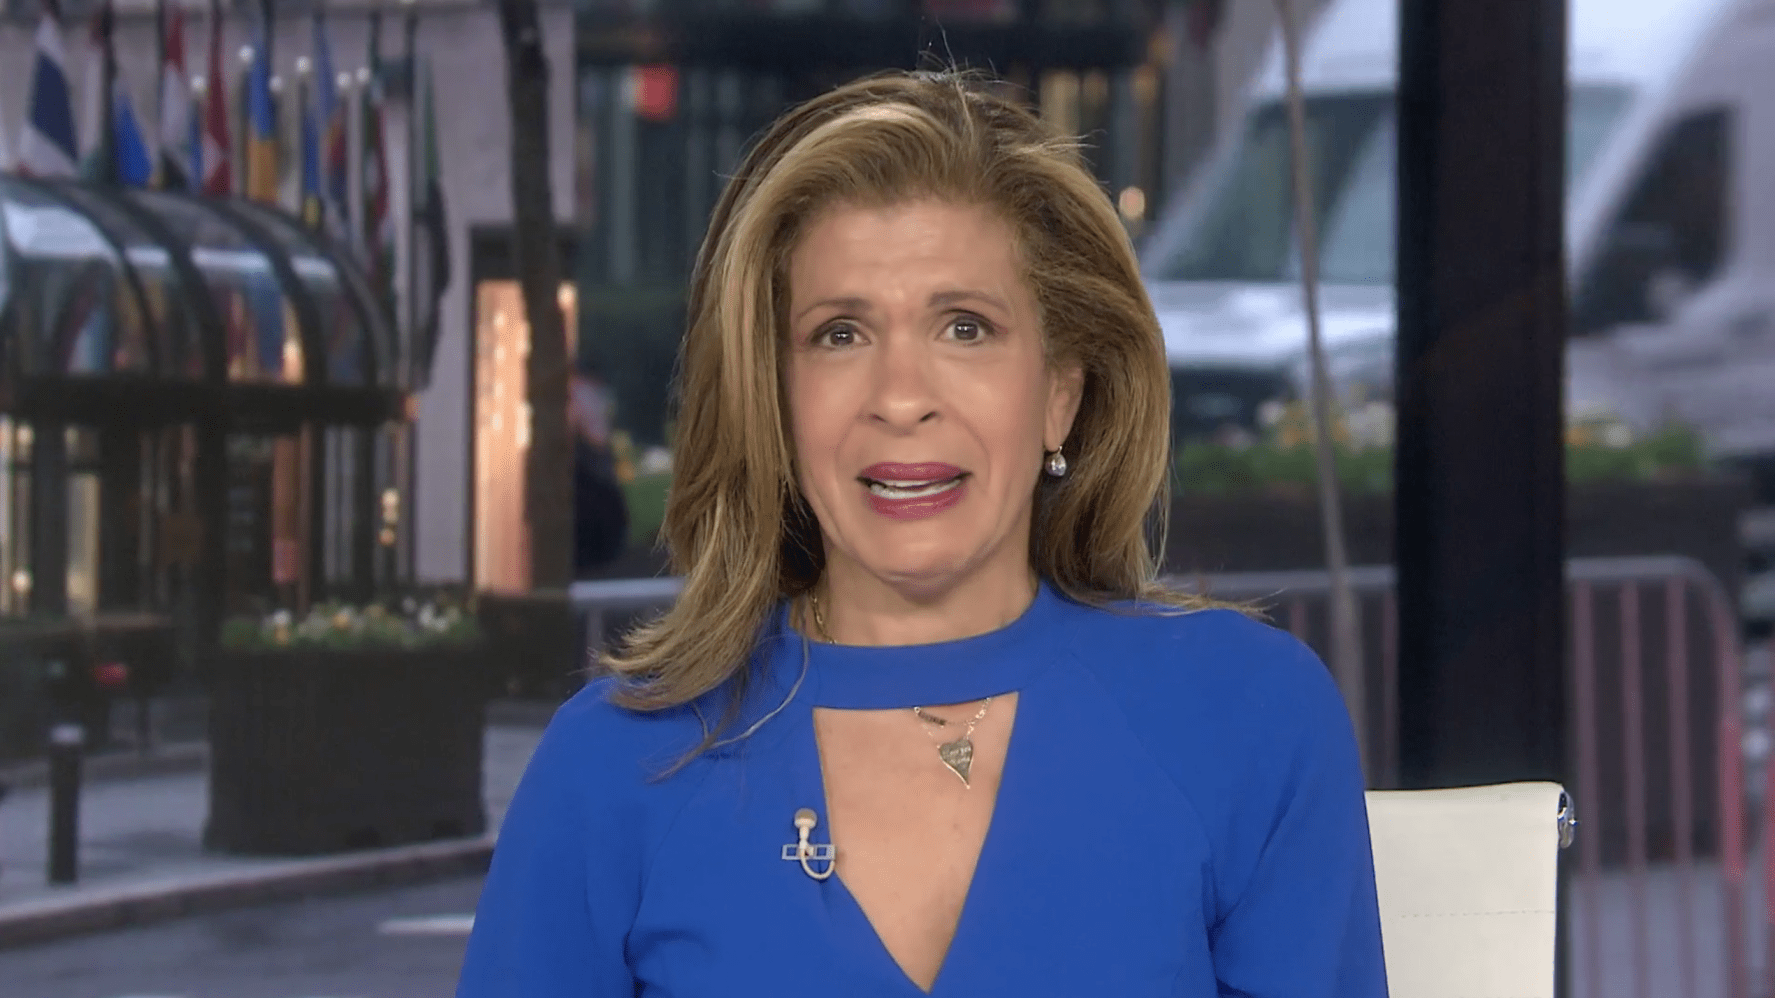 Hoda Kotb Gets Emotional After Powerful Interview About Her Beloved New